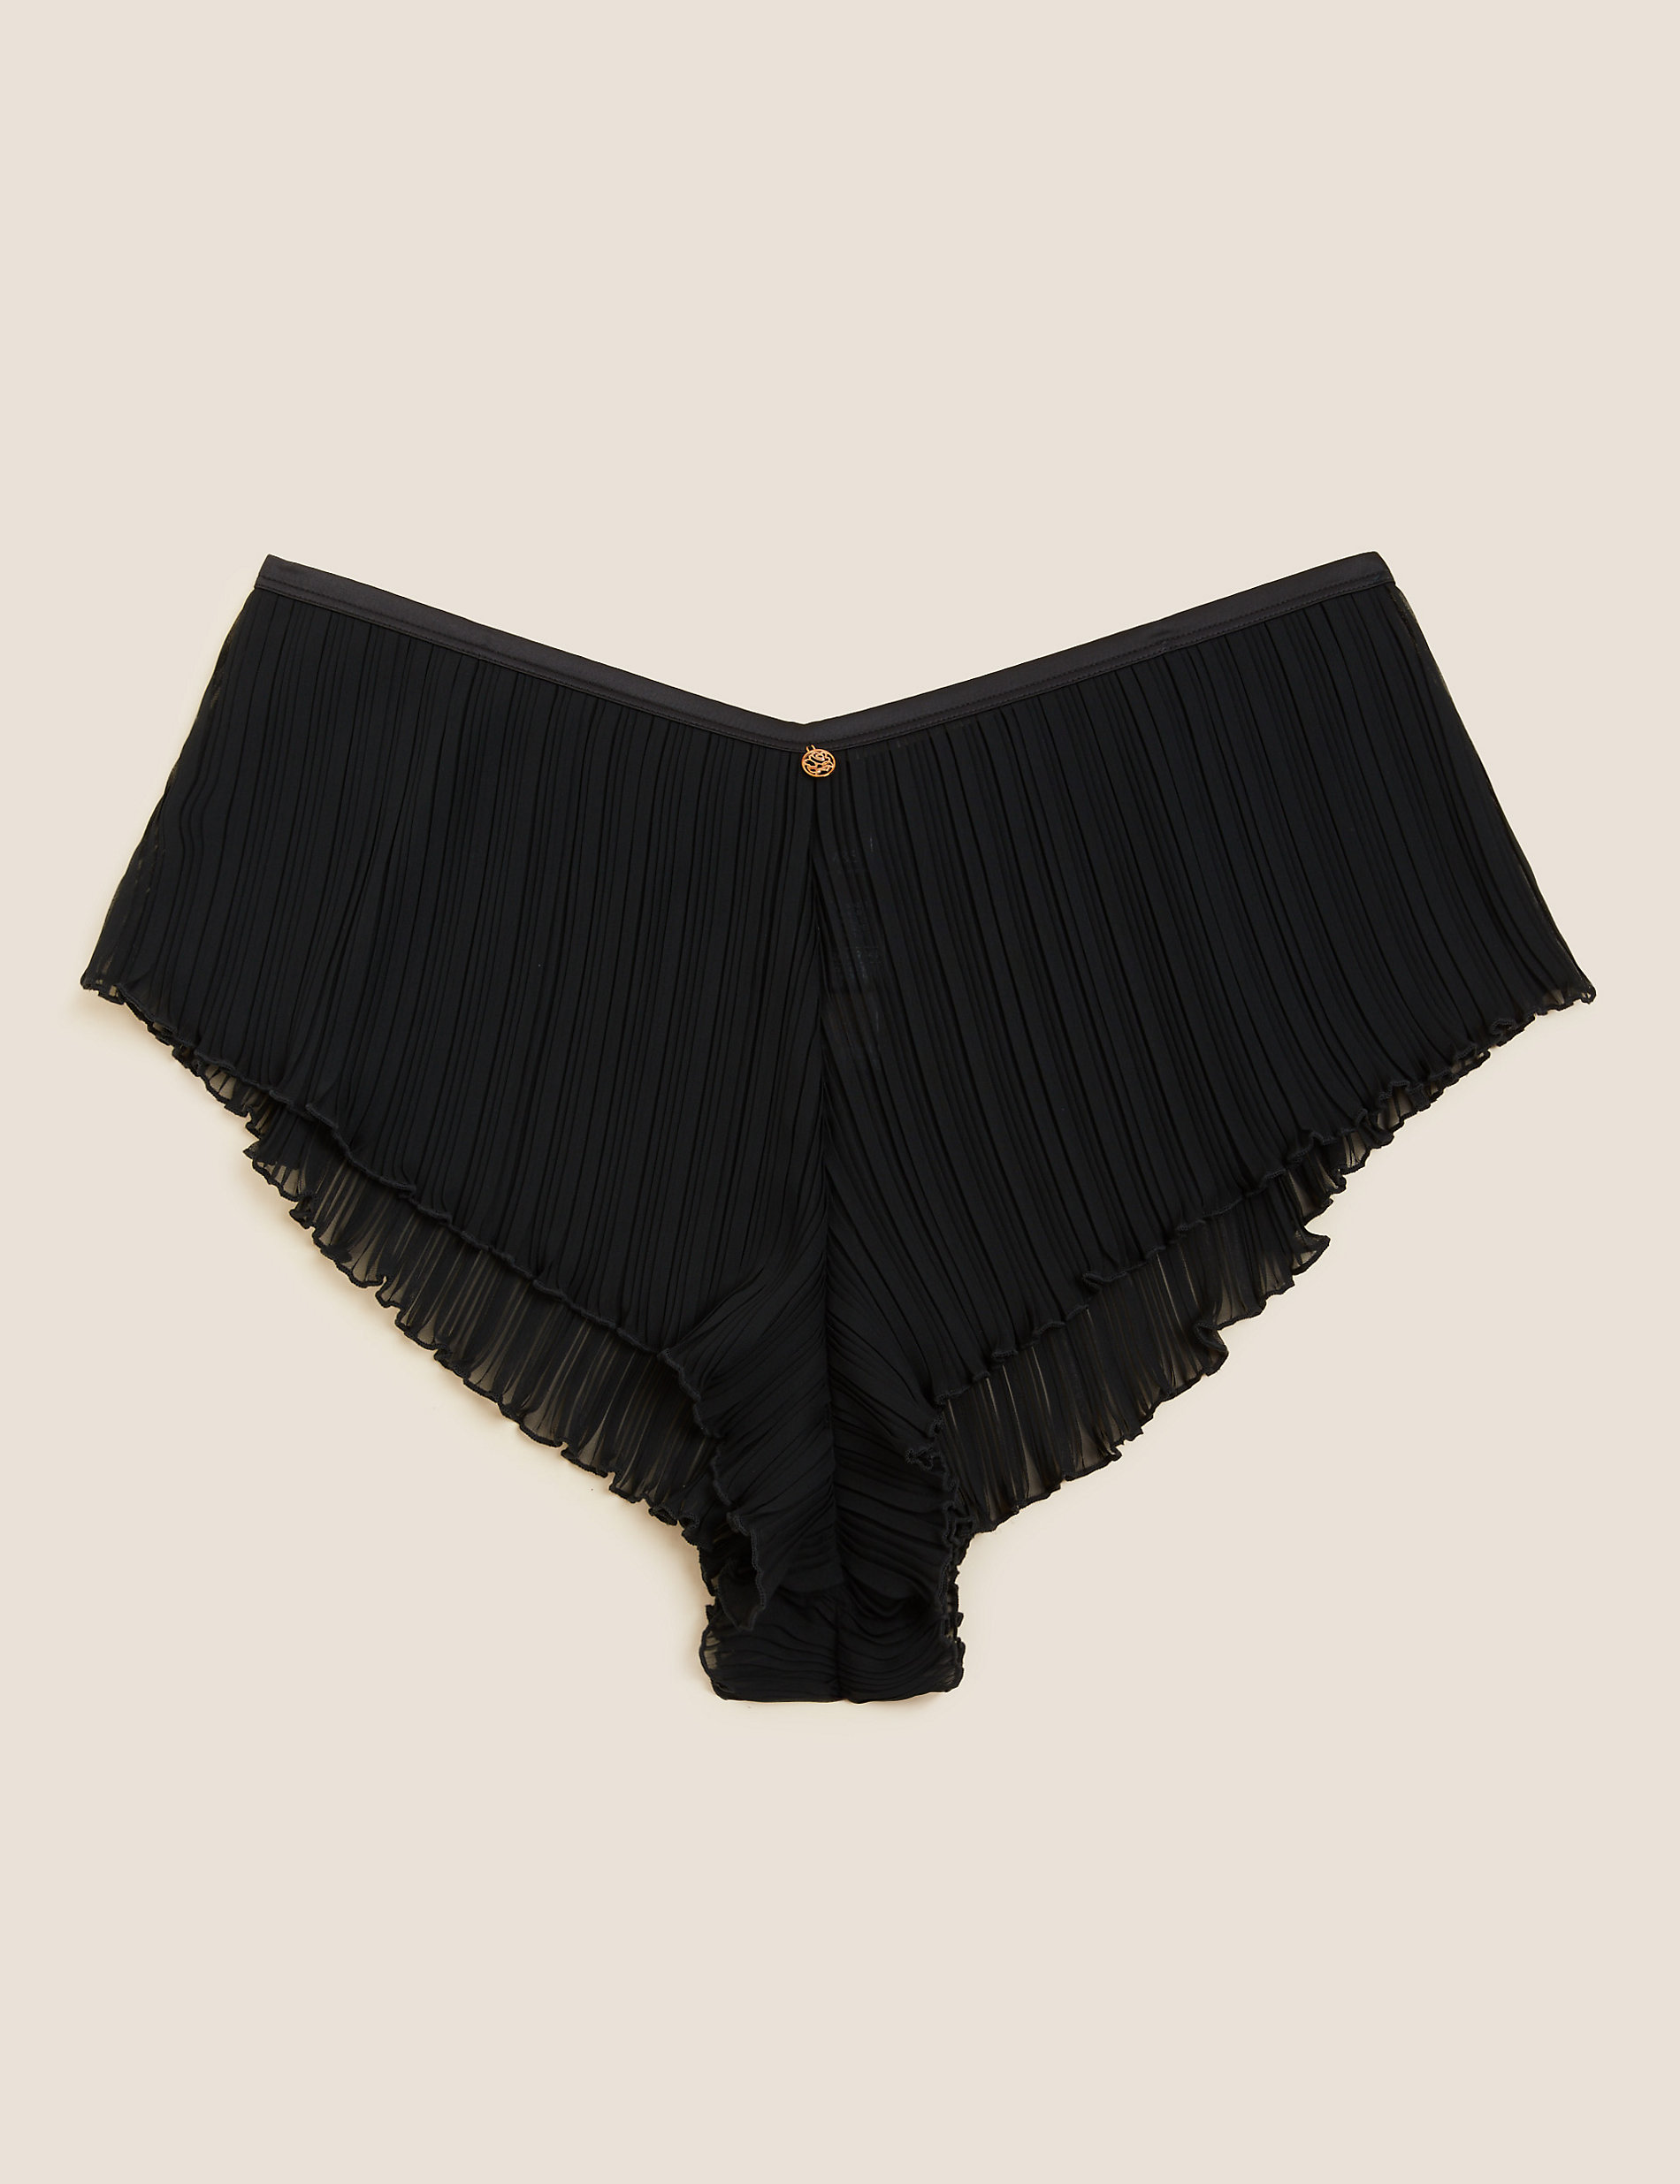 Pleat & Lace French Knickers